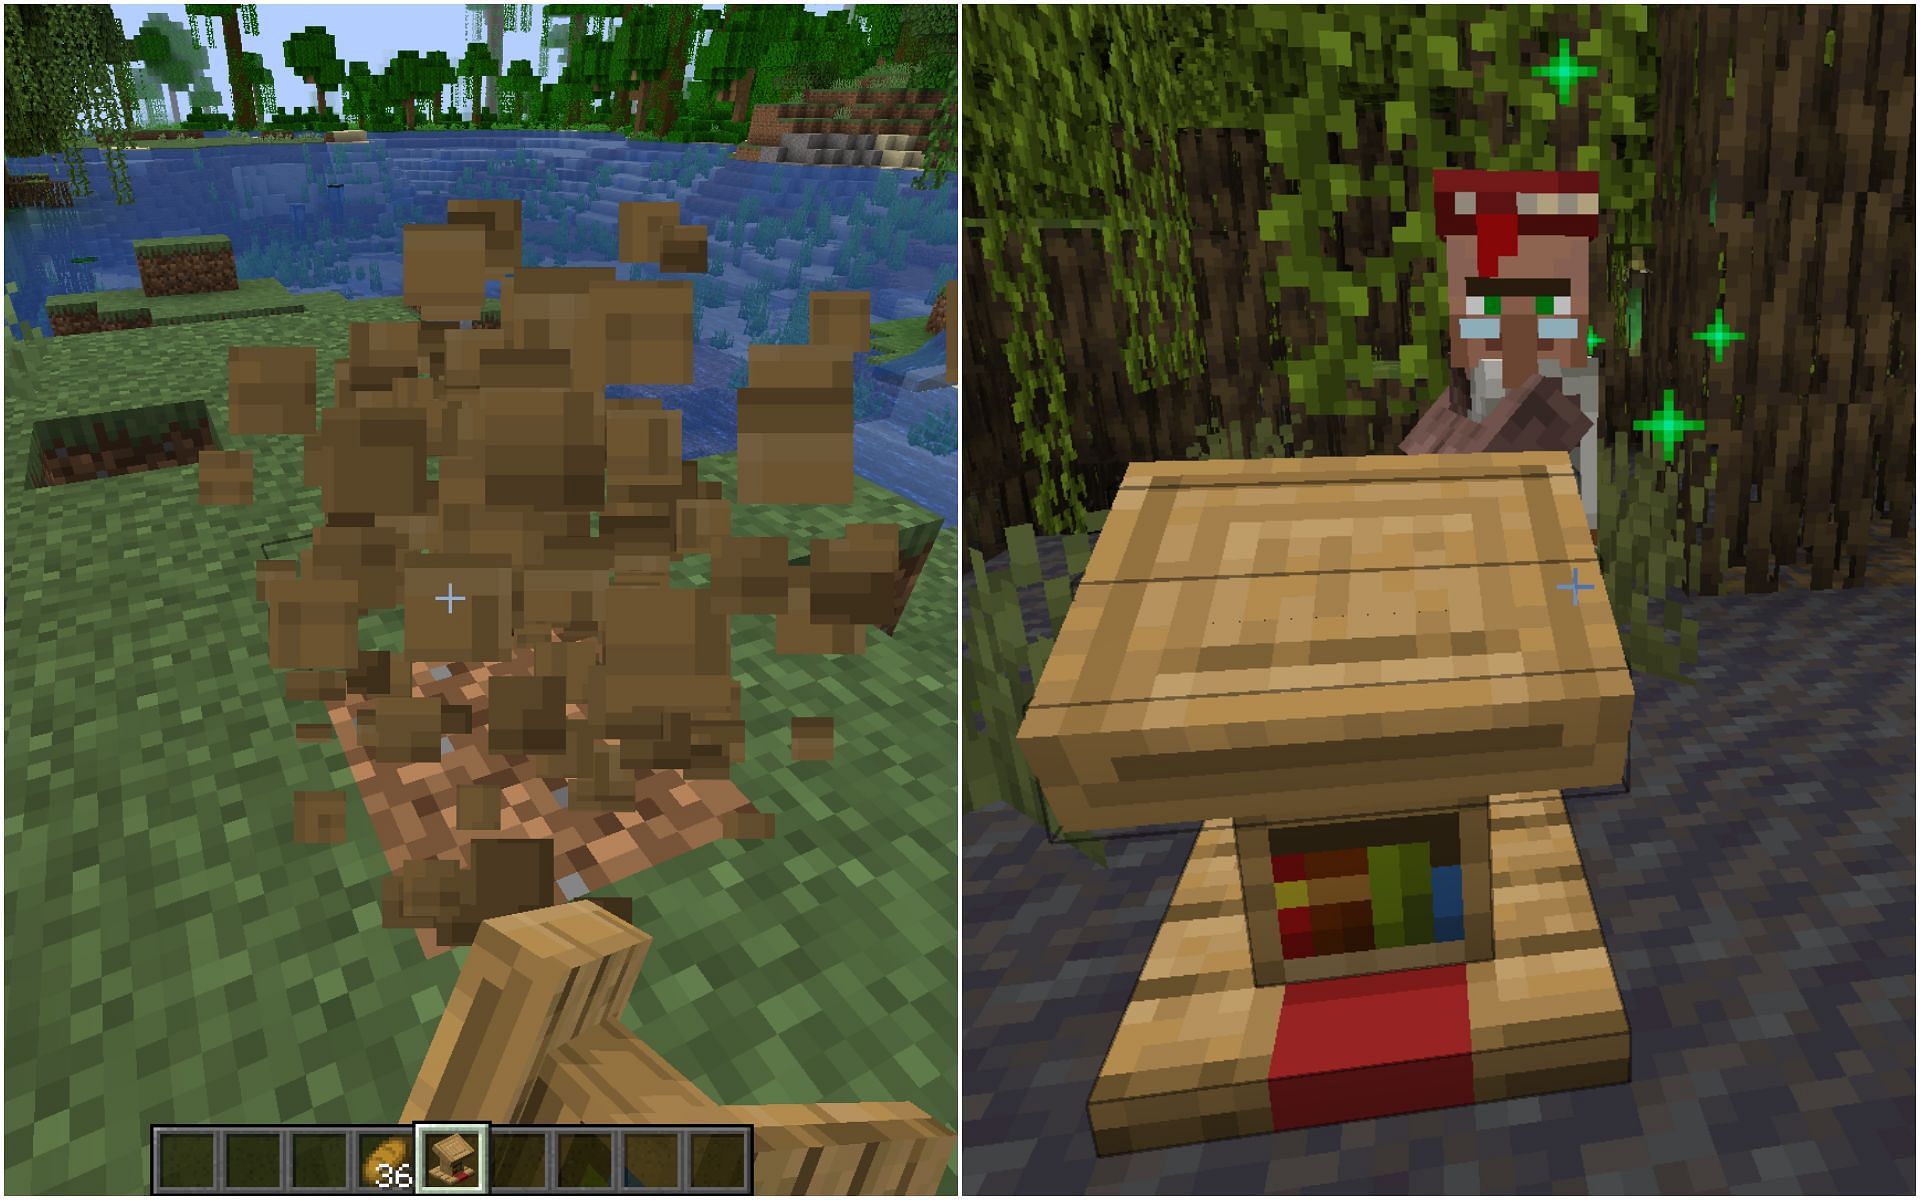 Change librarian trades by breaking and placing lecterns in Minecraft (Image via Sportskeeda)